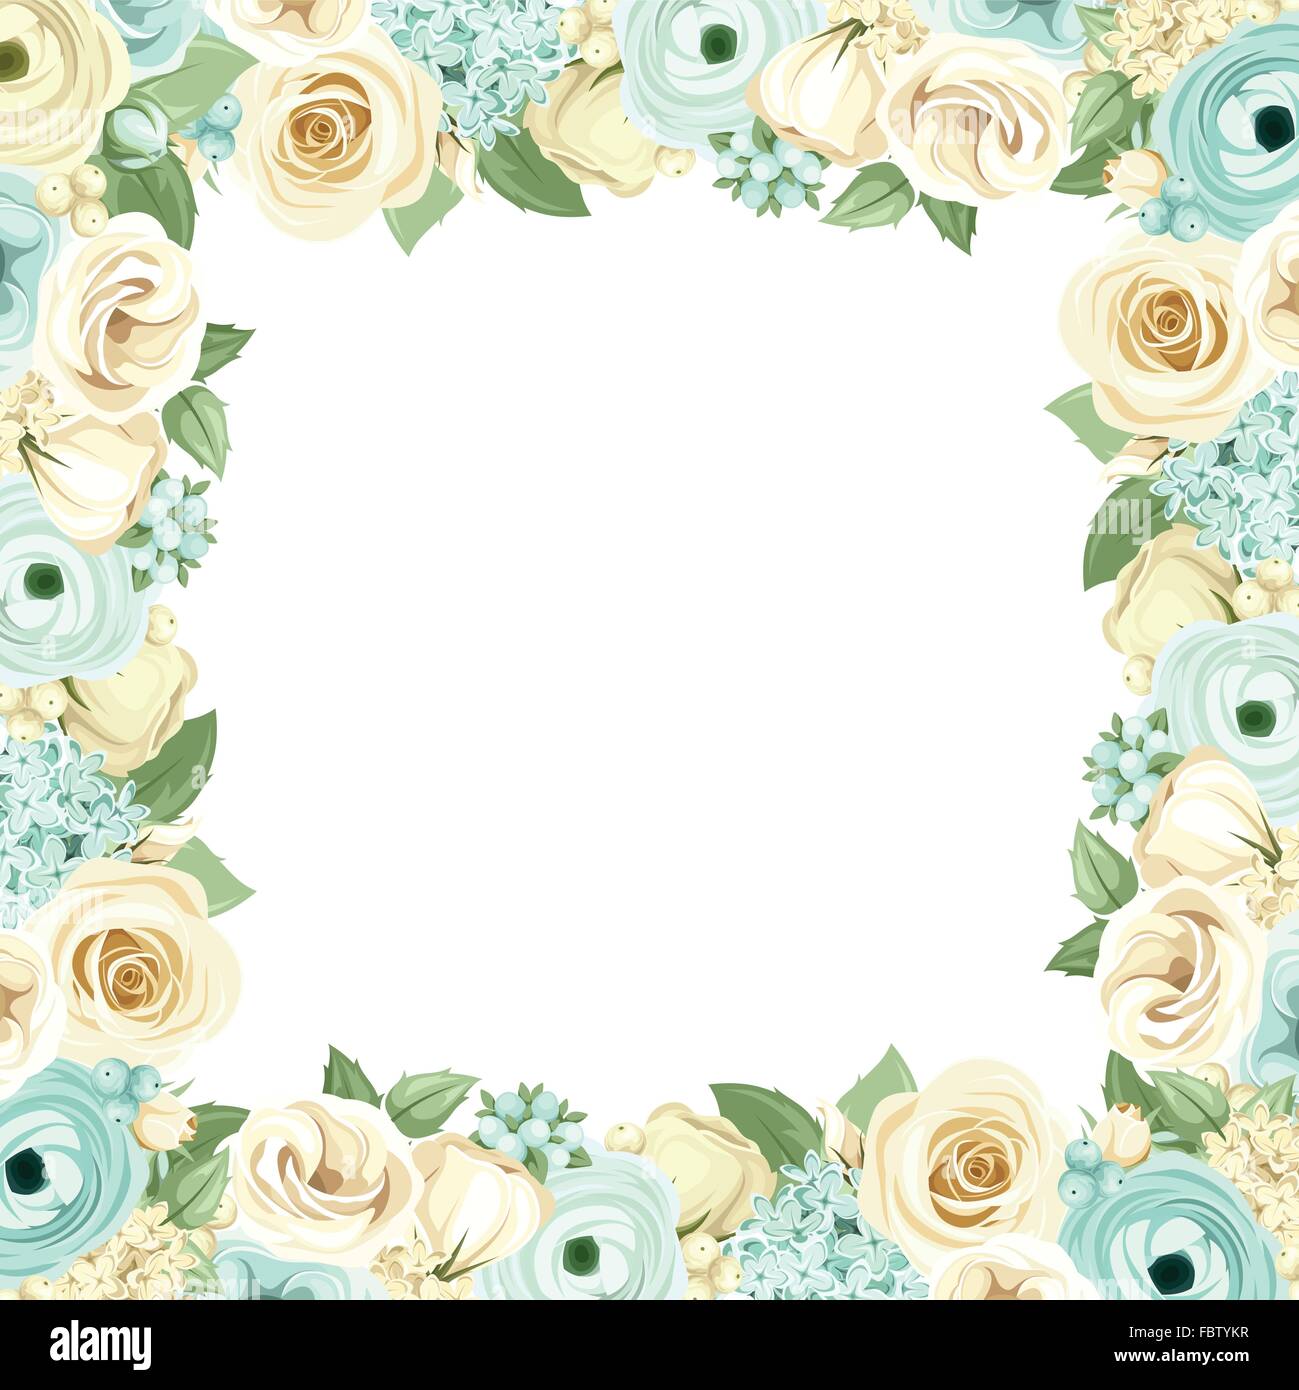 Frame with blue and white flowers. Vector illustration. Stock Vector